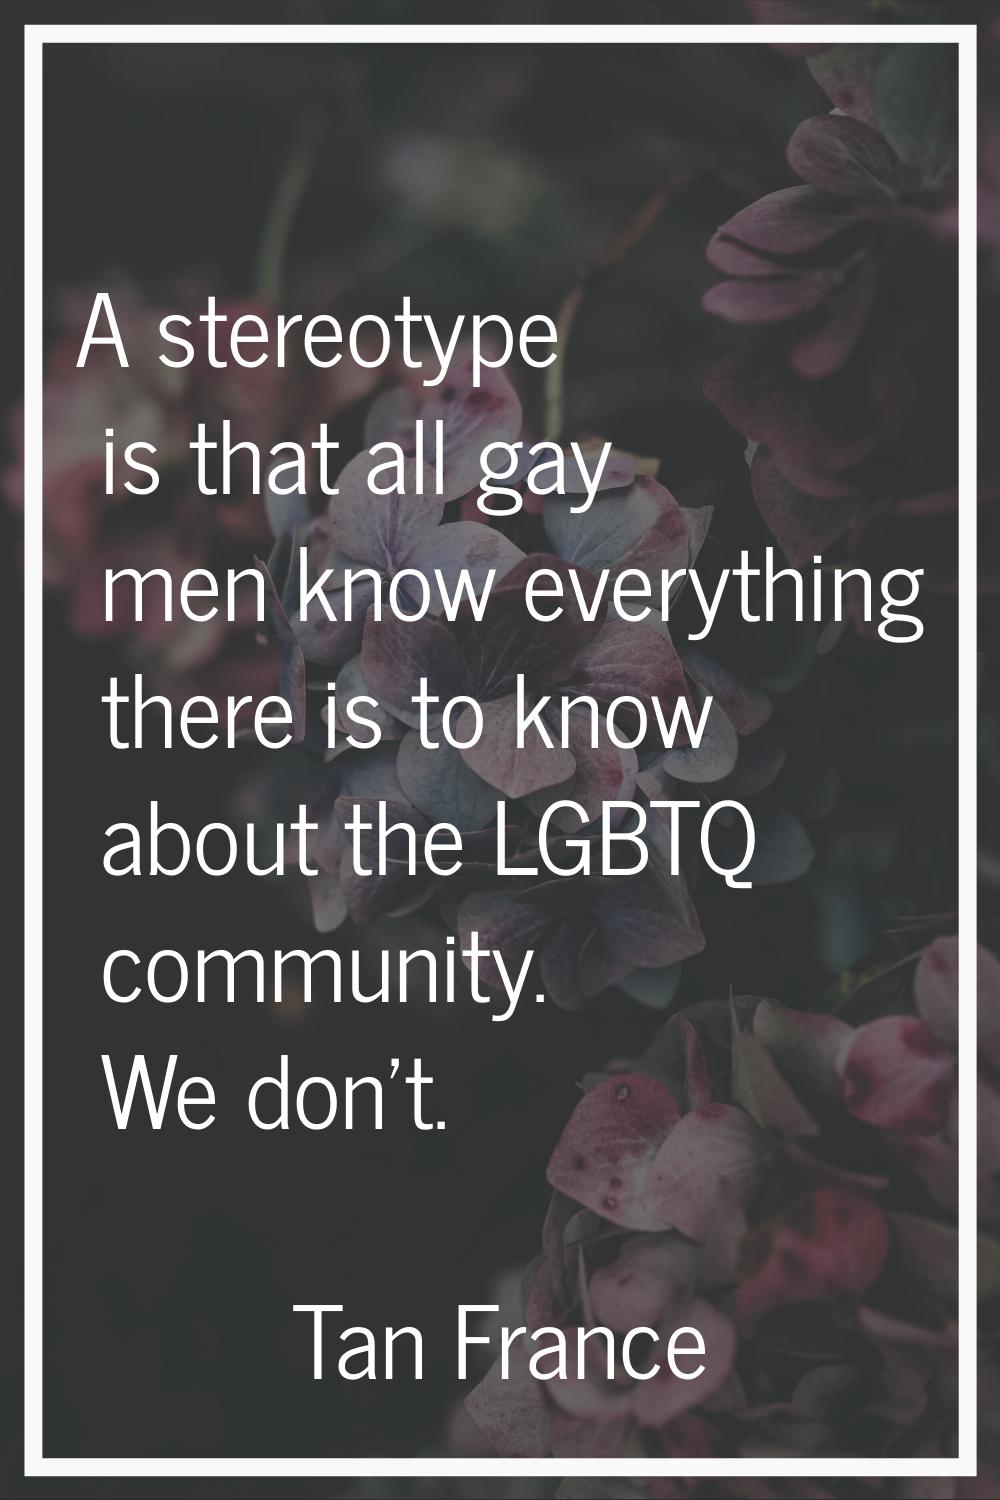 A stereotype is that all gay men know everything there is to know about the LGBTQ community. We don